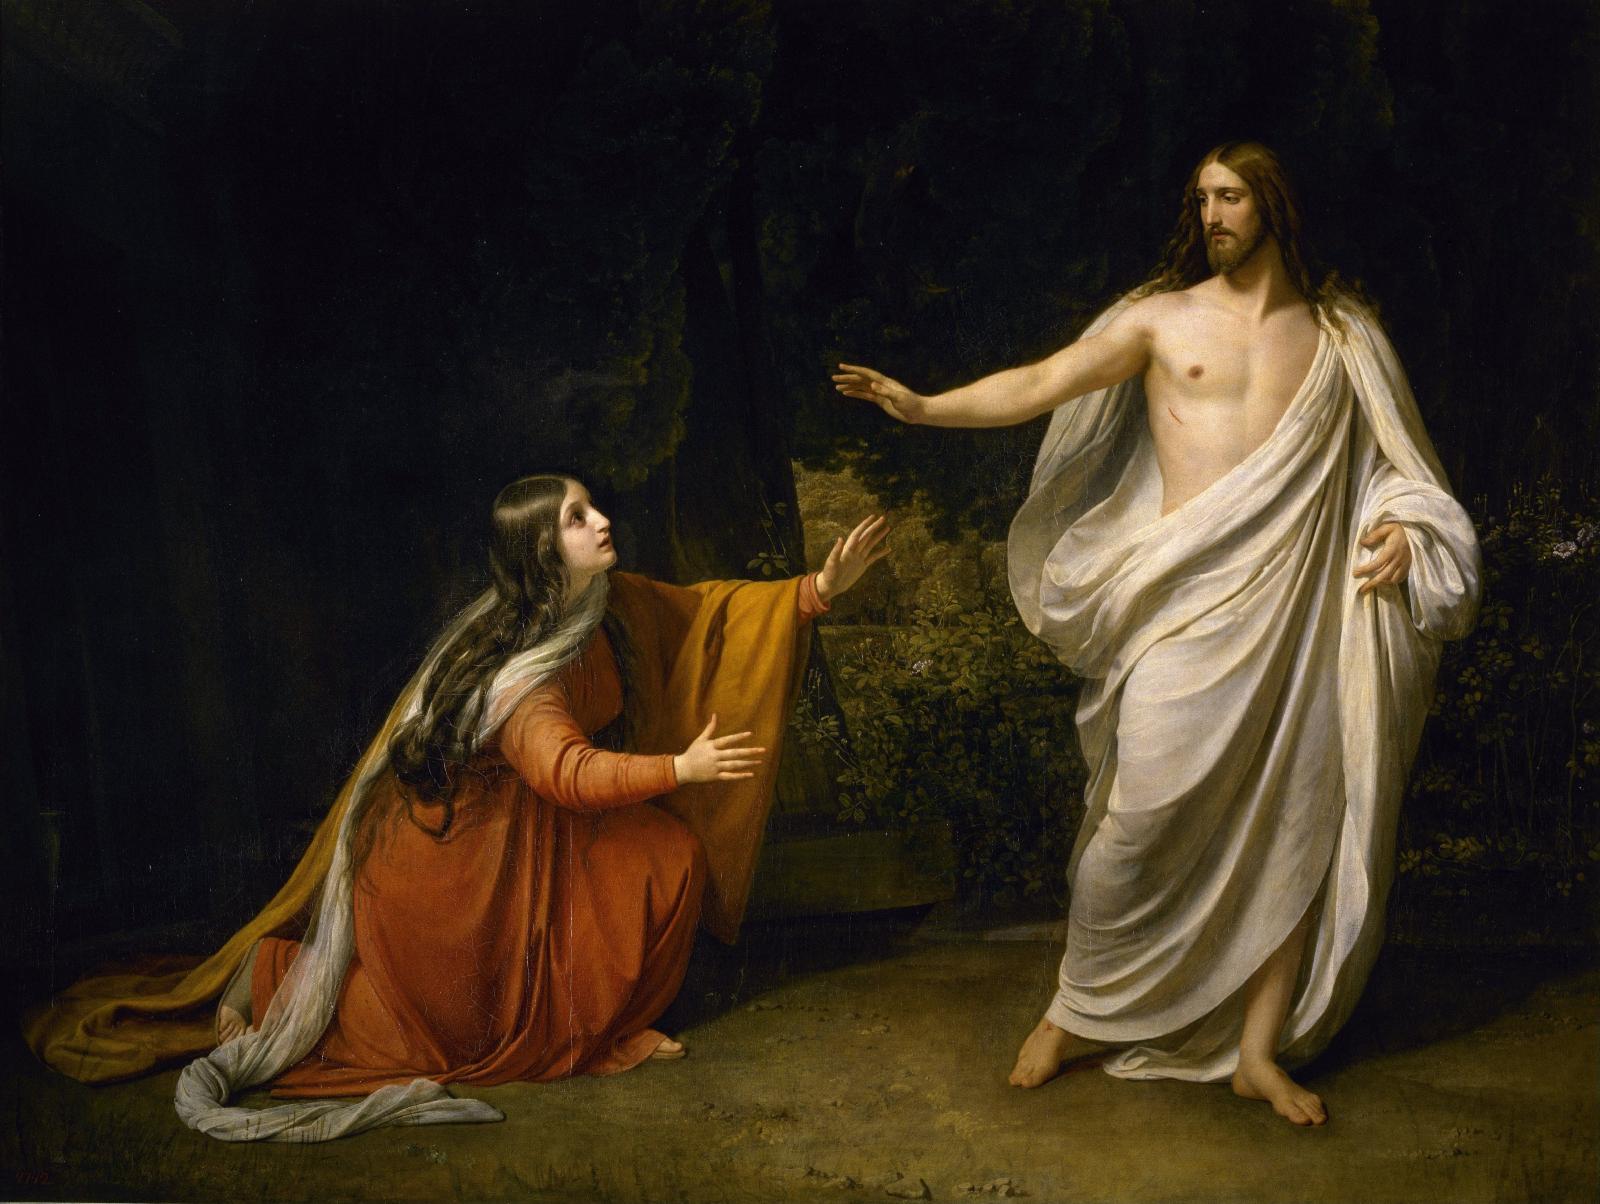 The Resurrection and the need to love and be loved